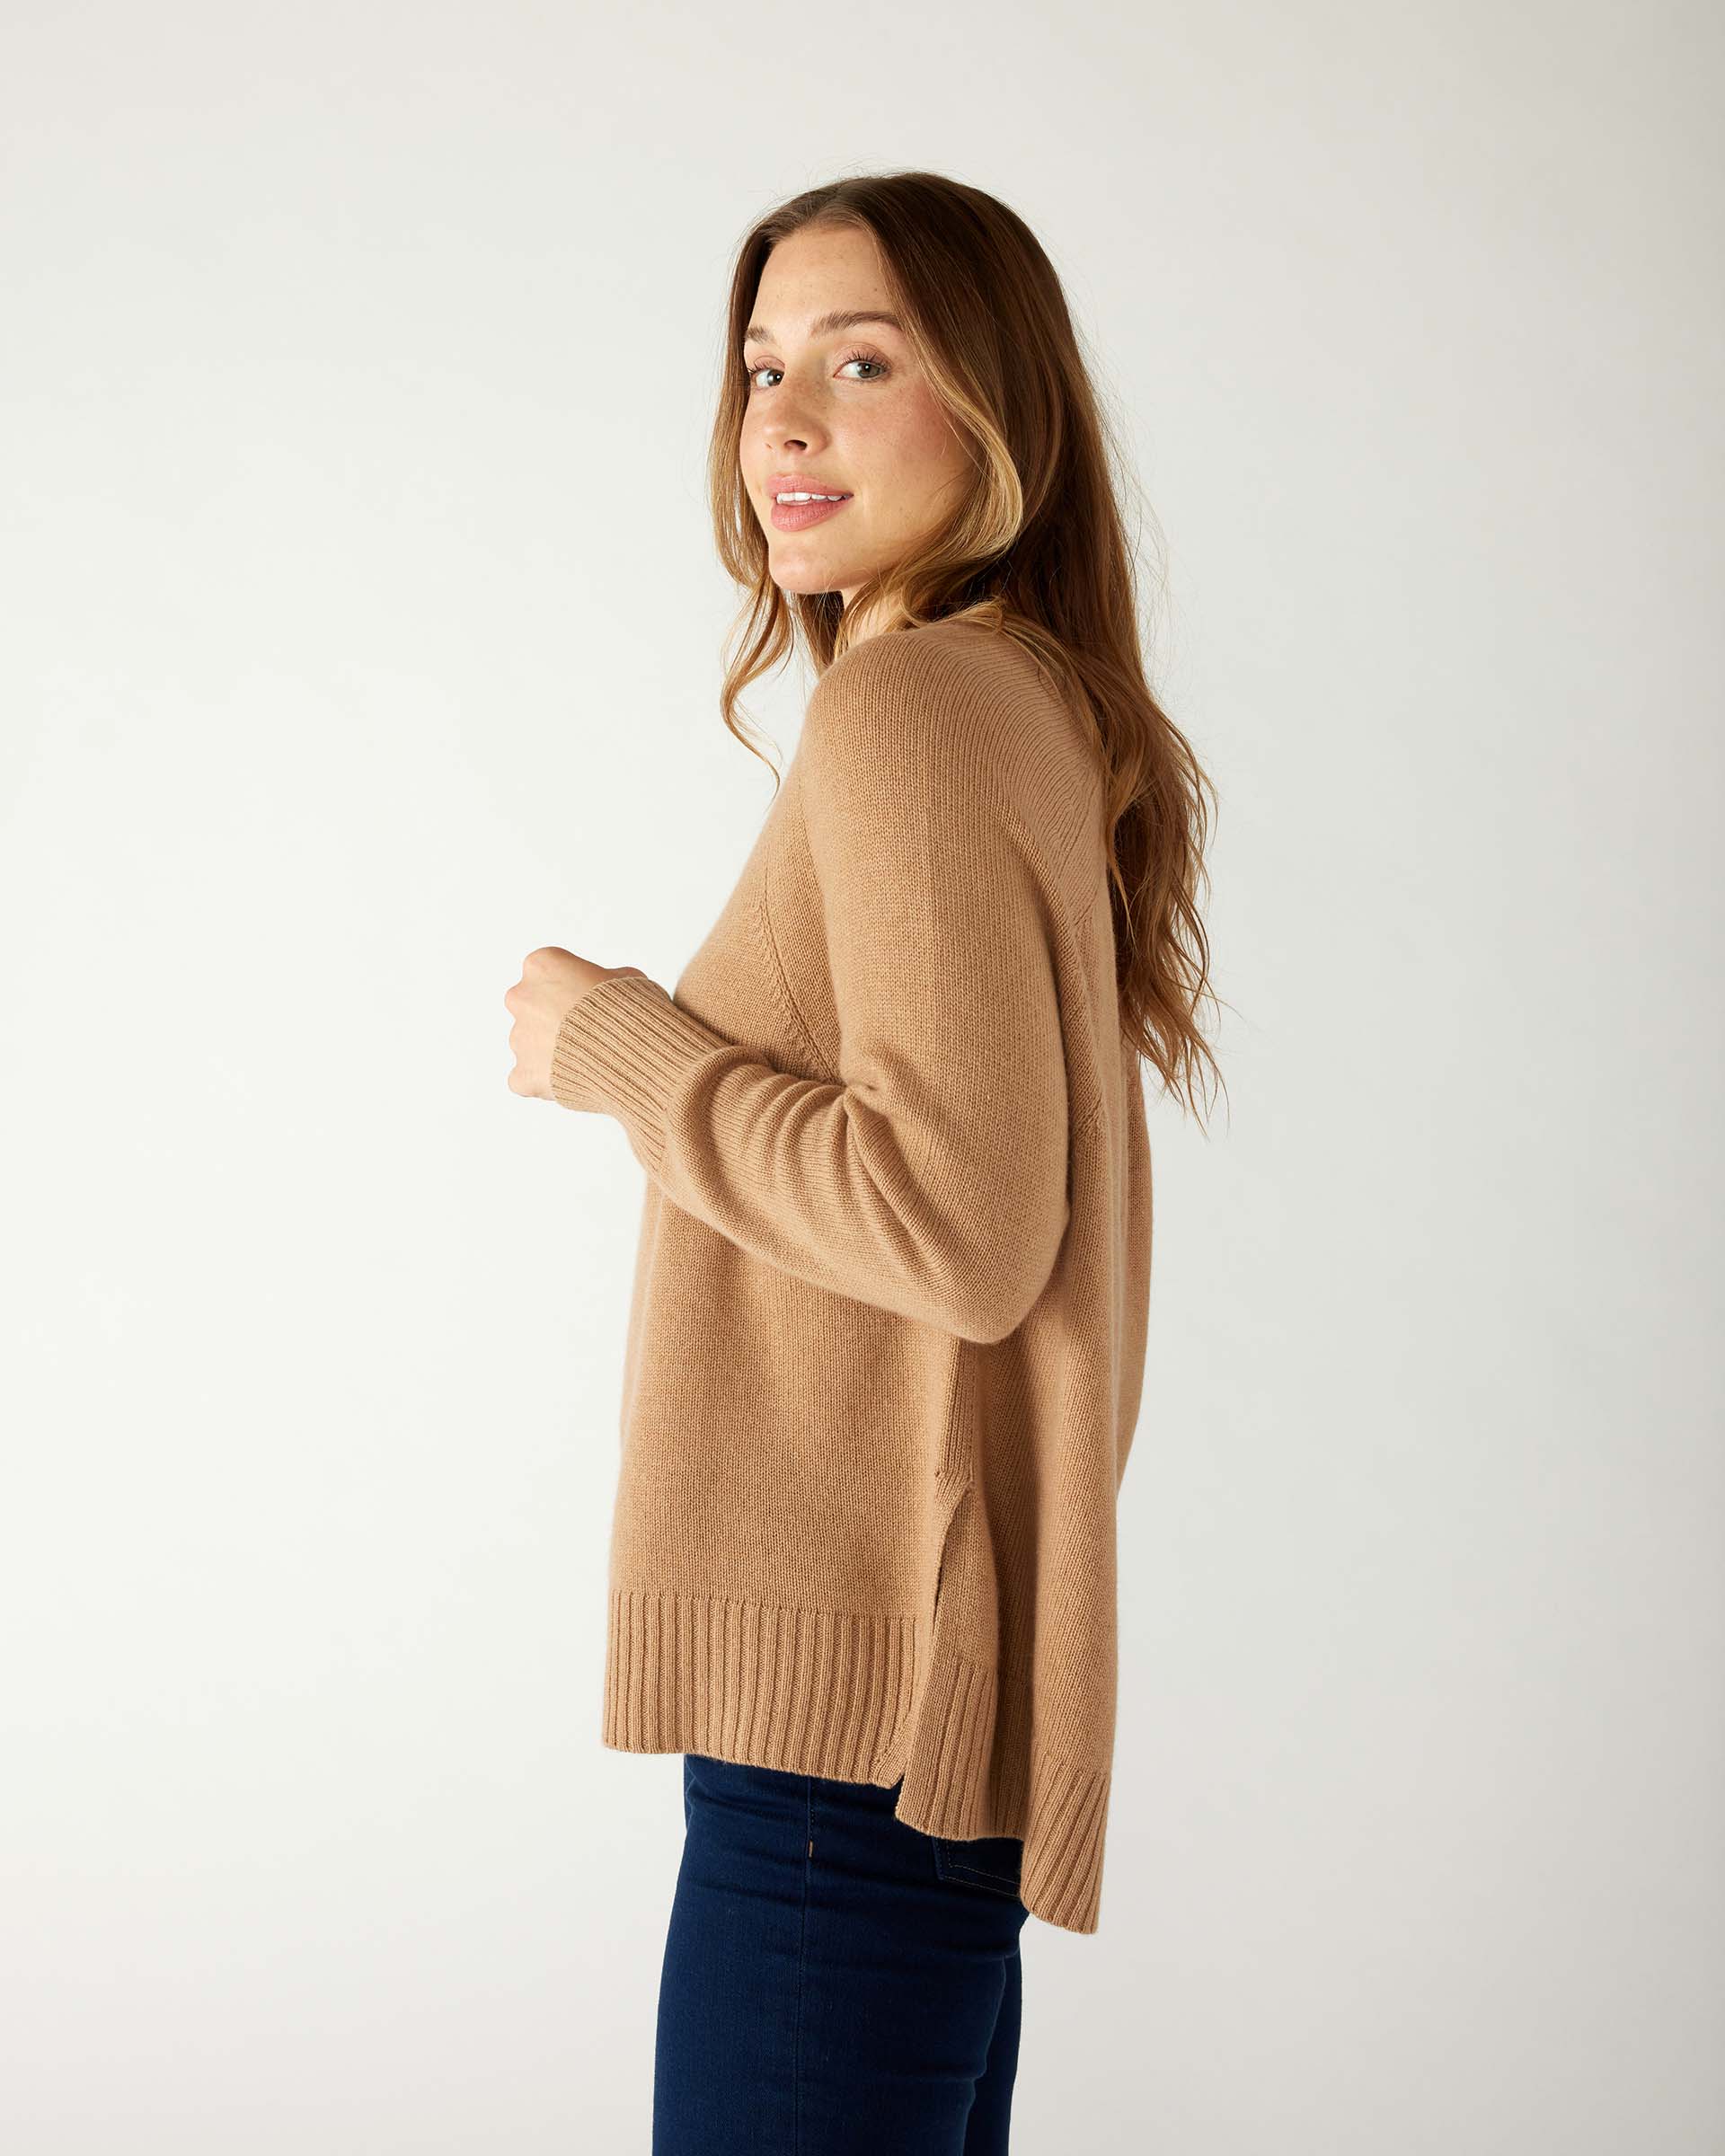 profile of woman wearing mersea banff cashmere sweater in camel